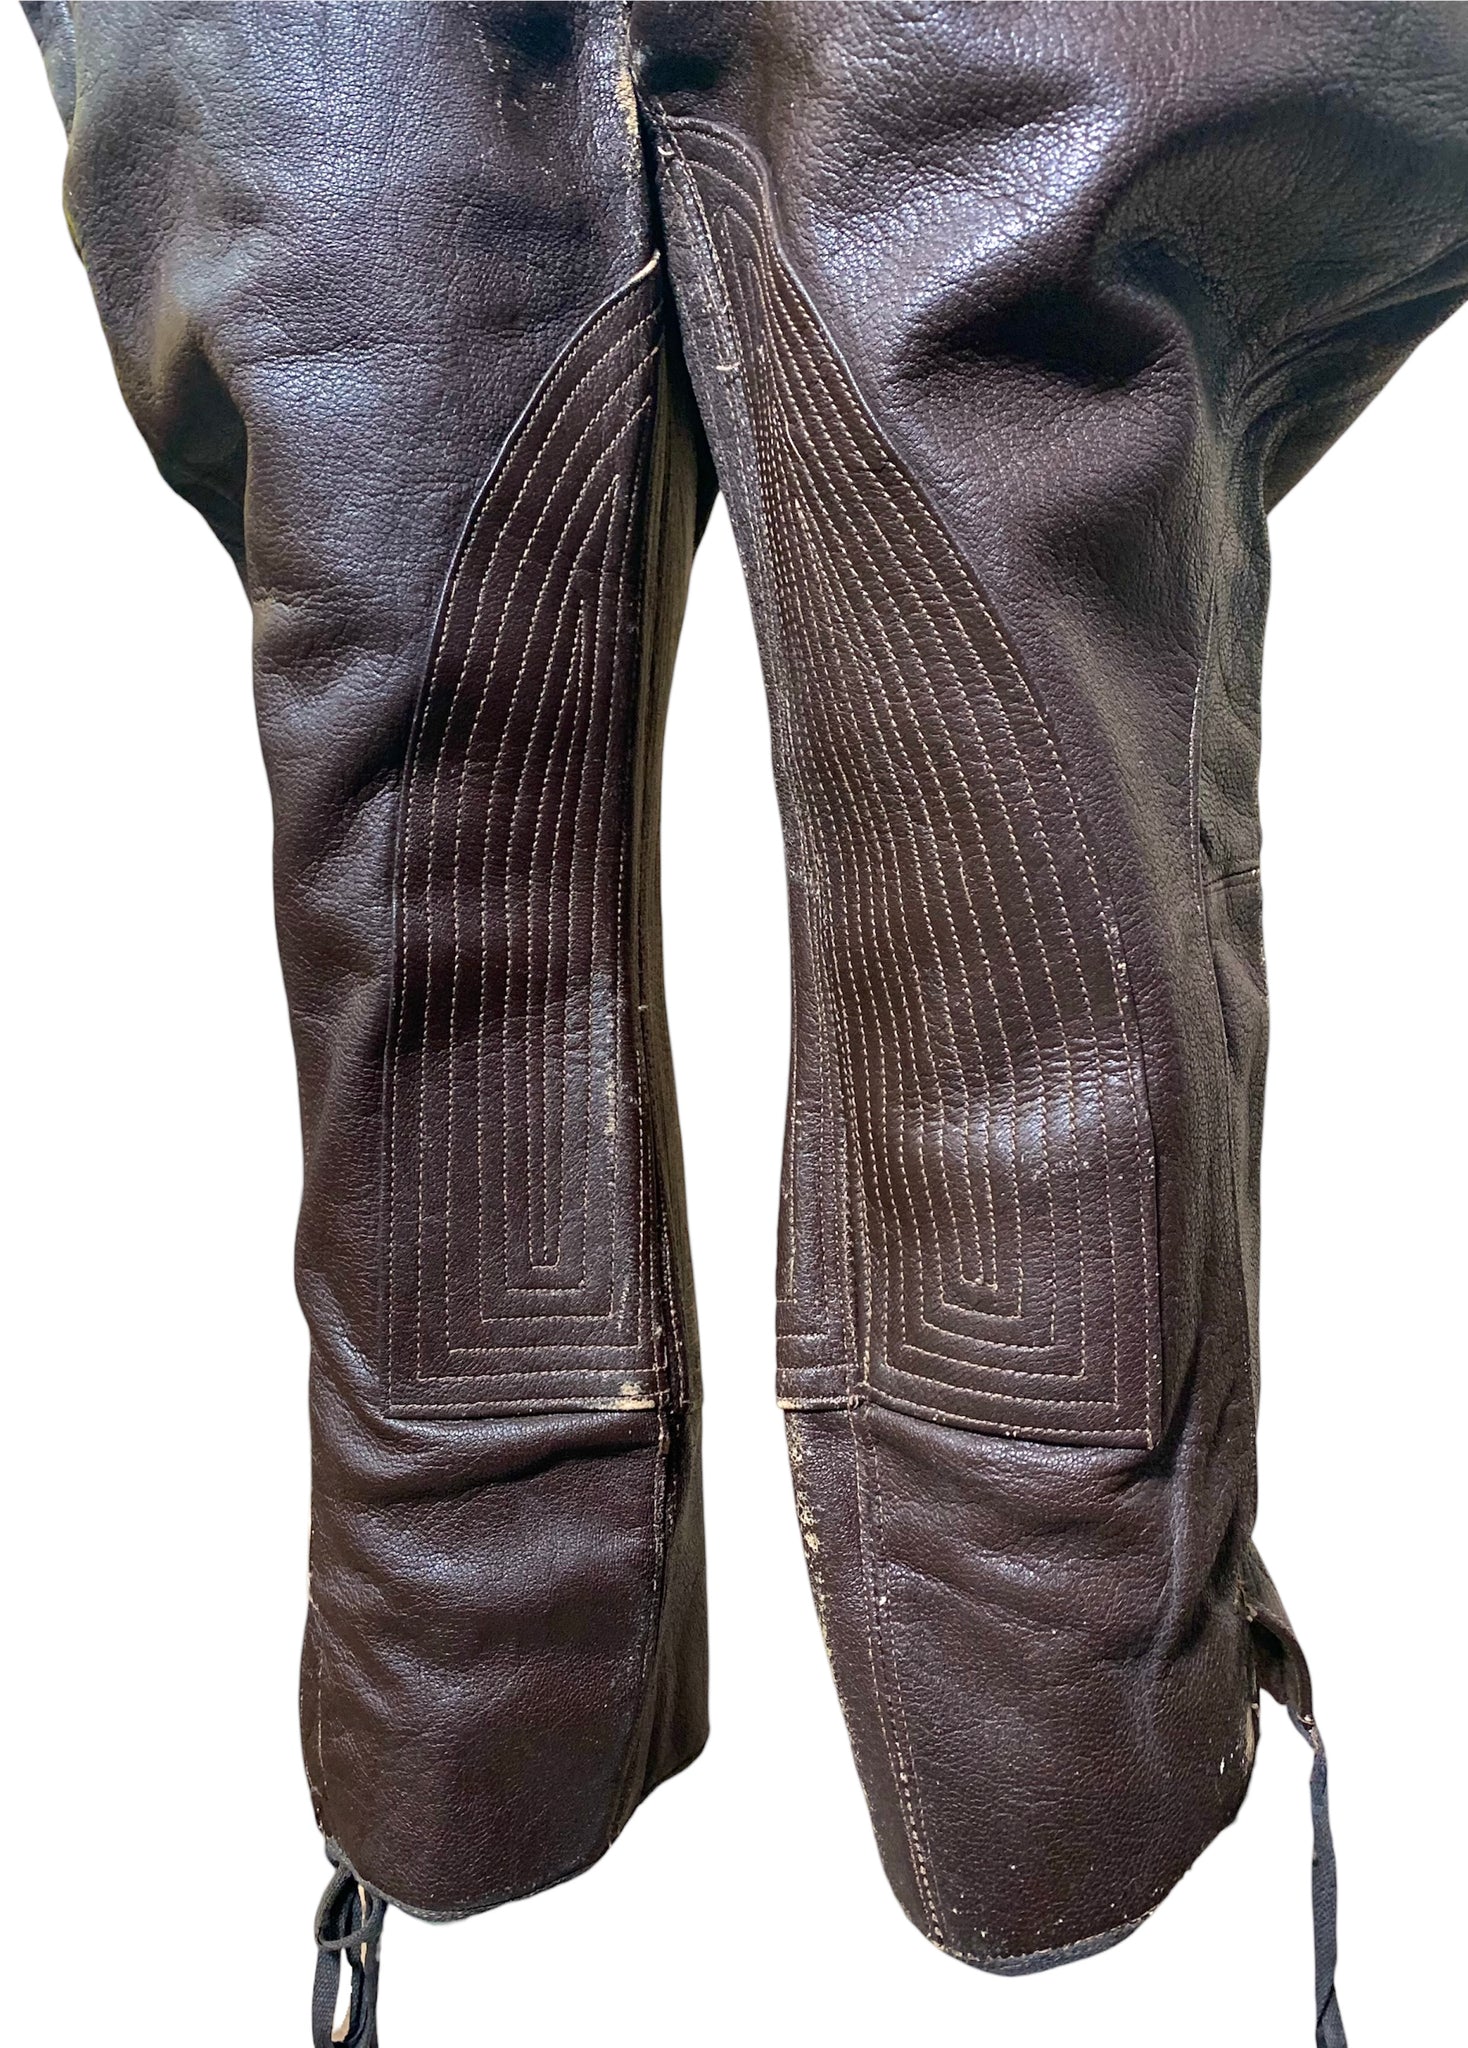 Leather motorcycle pants with laces on the side. : Amazon.nl: Automotive